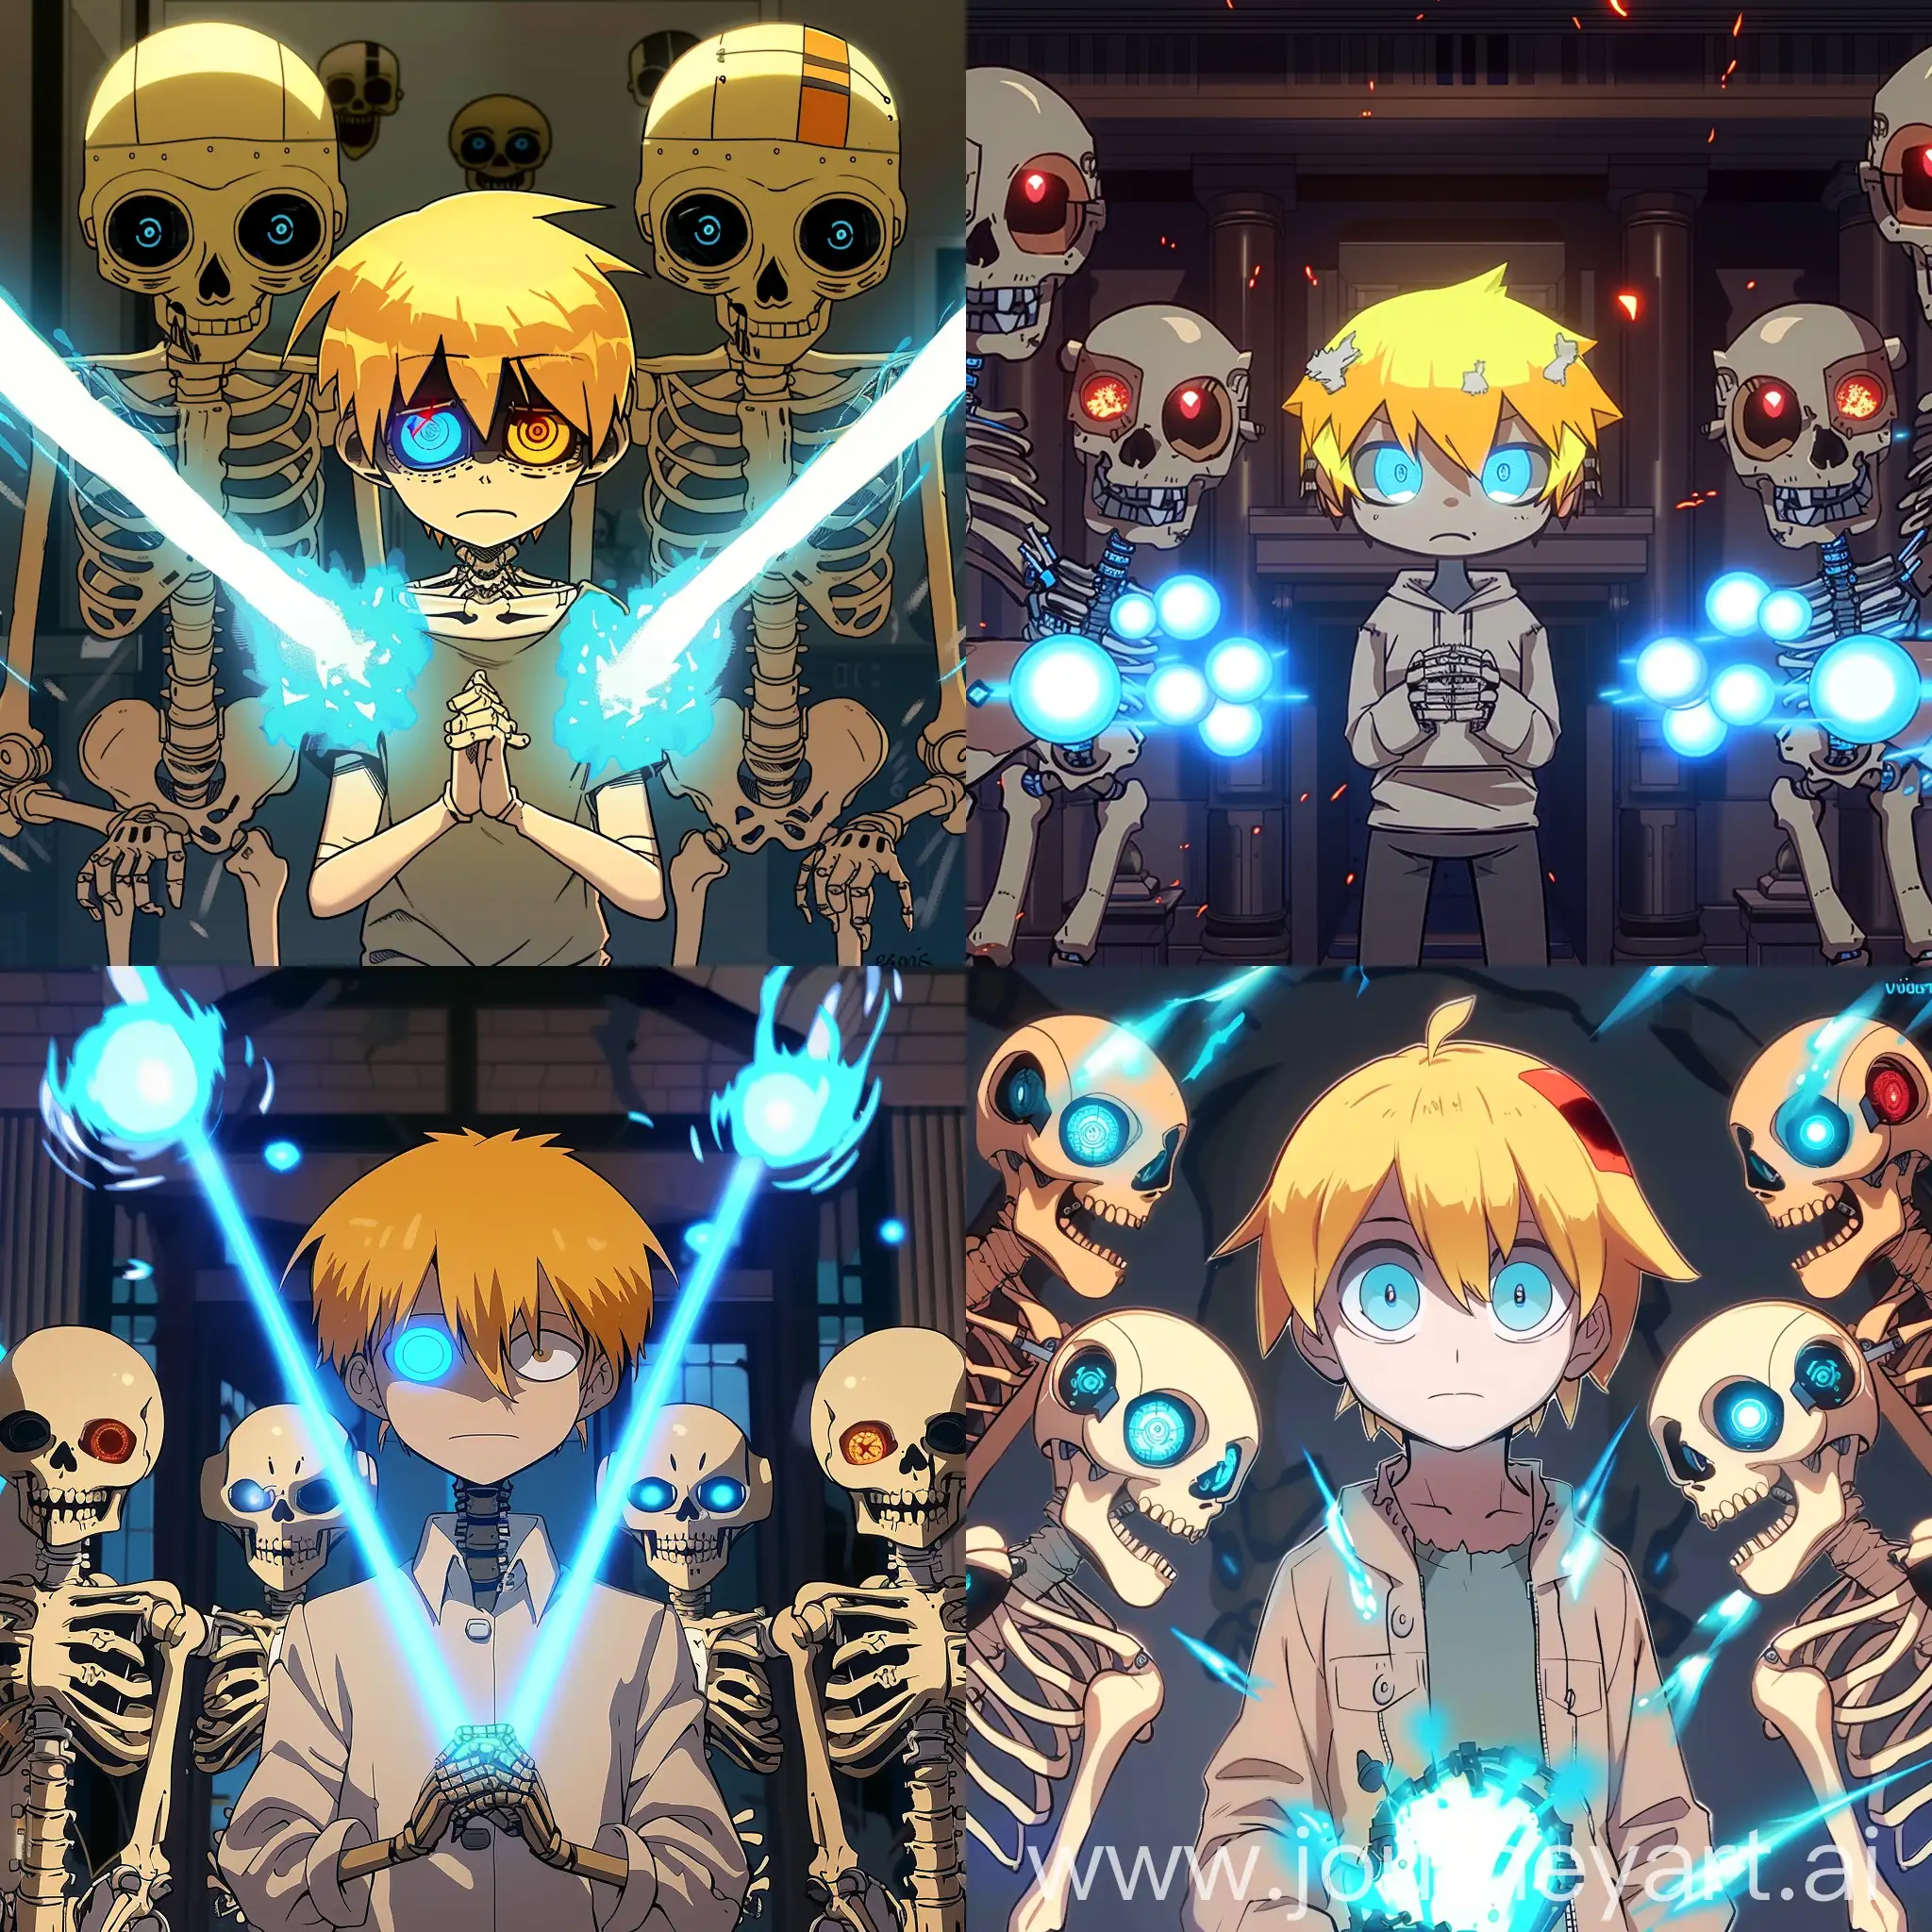 Sans-and-Skeletons-Shooting-Blue-Fireballs-in-Anime-Style